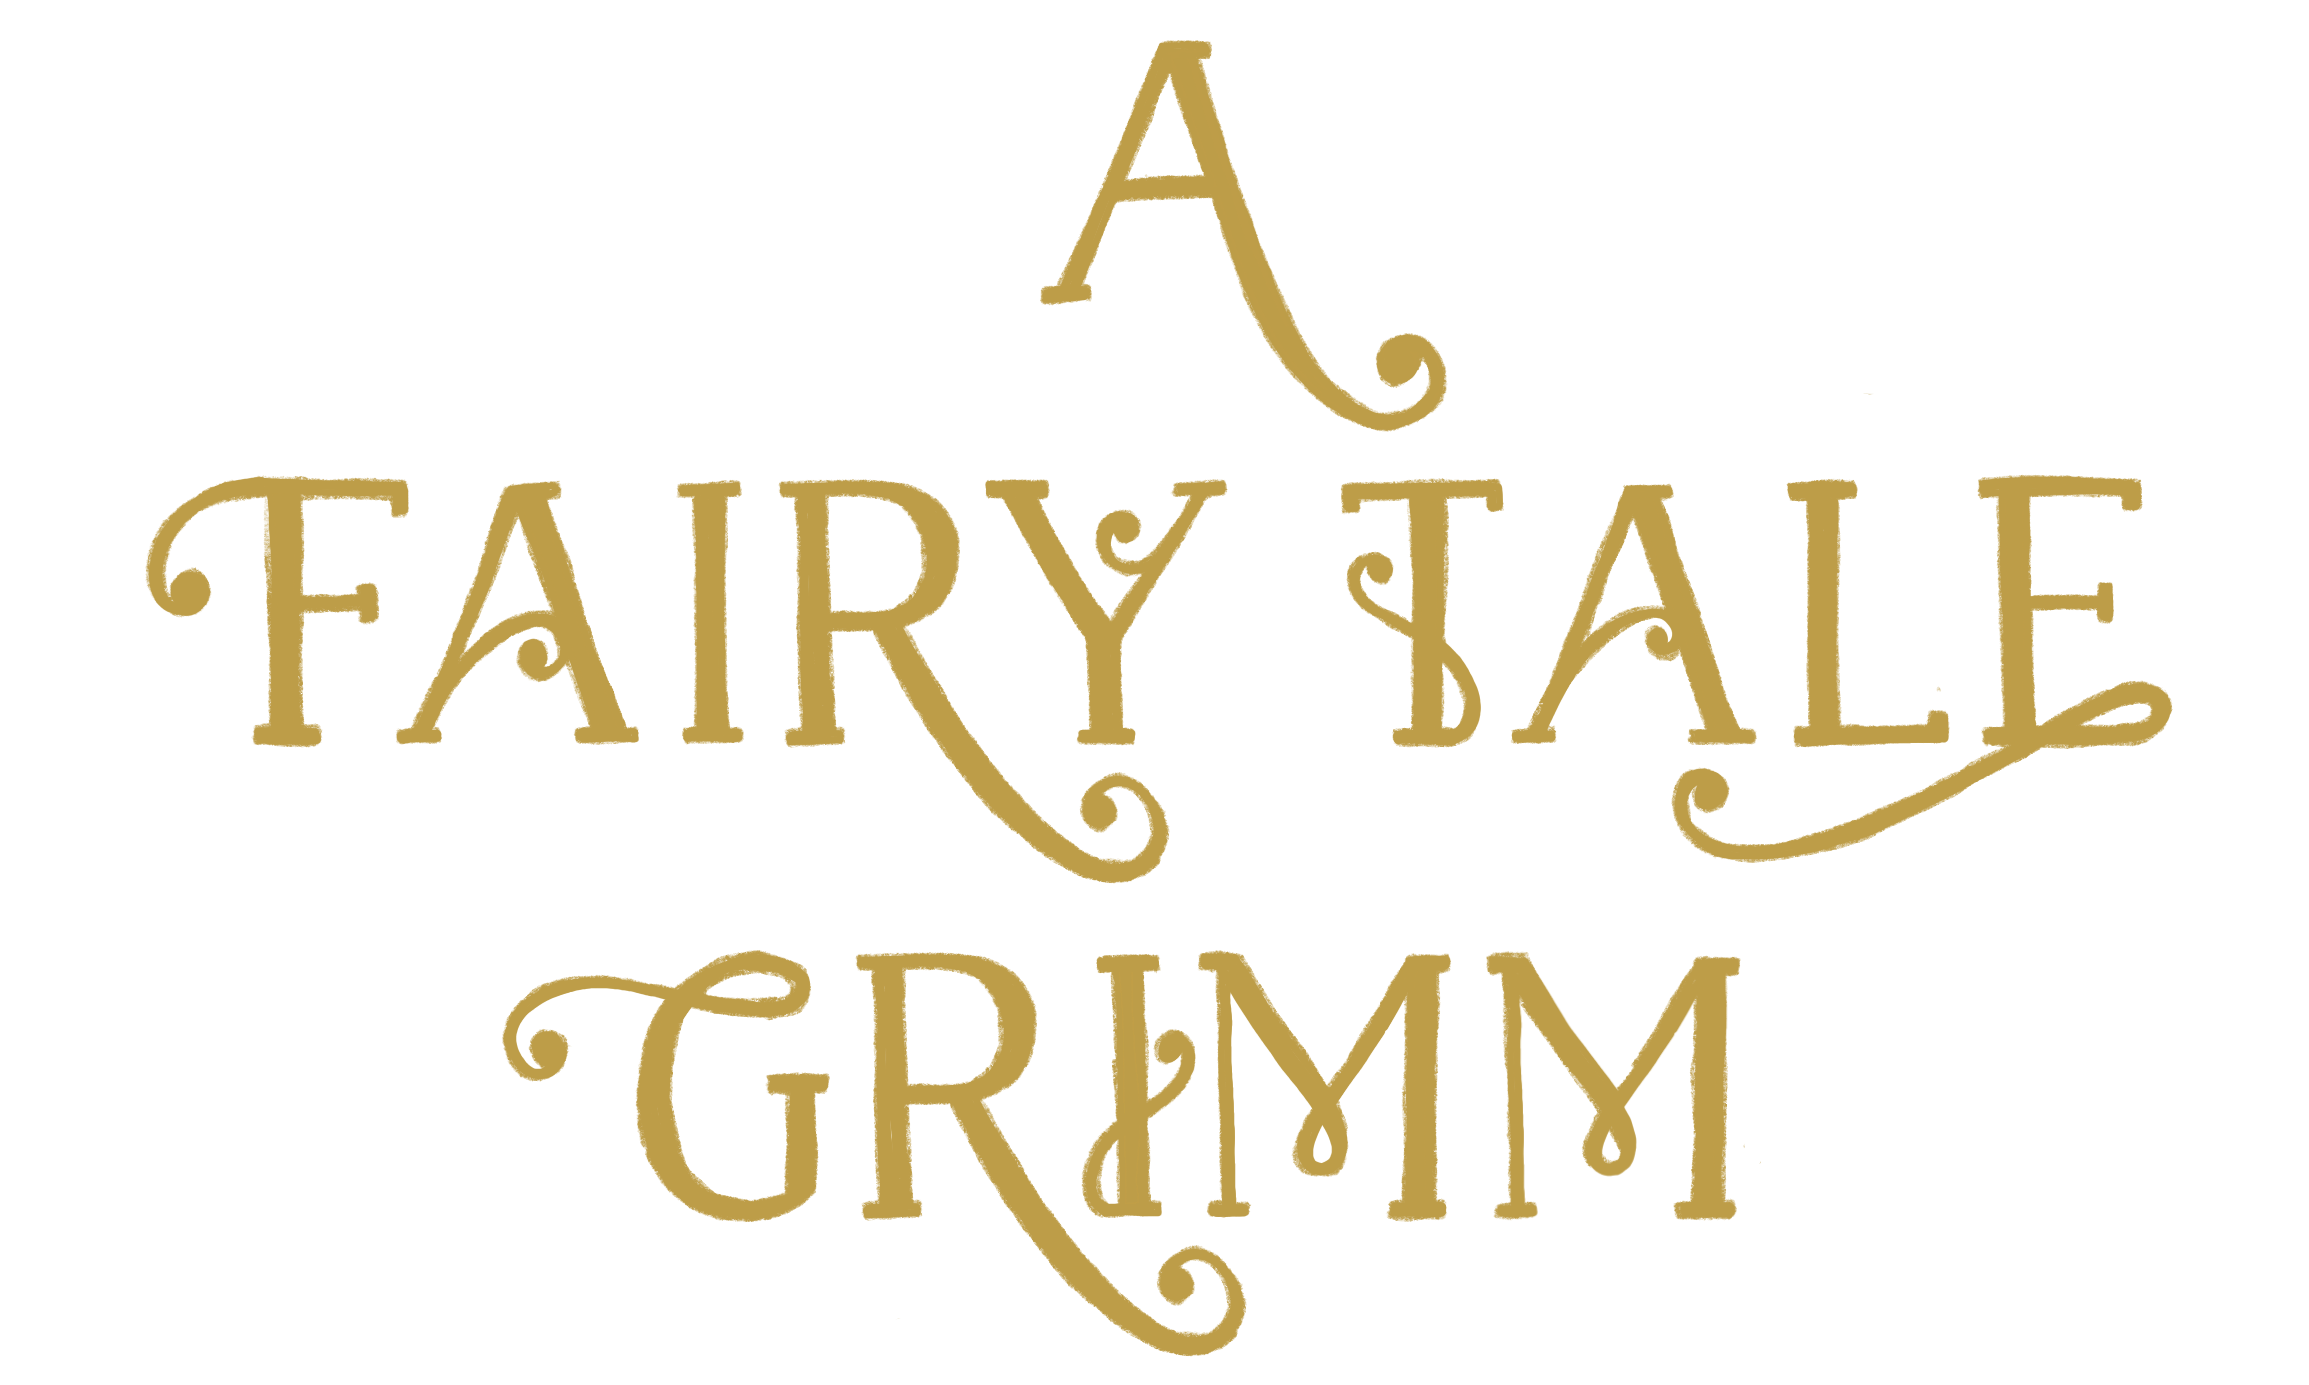 A fairy tale grimm